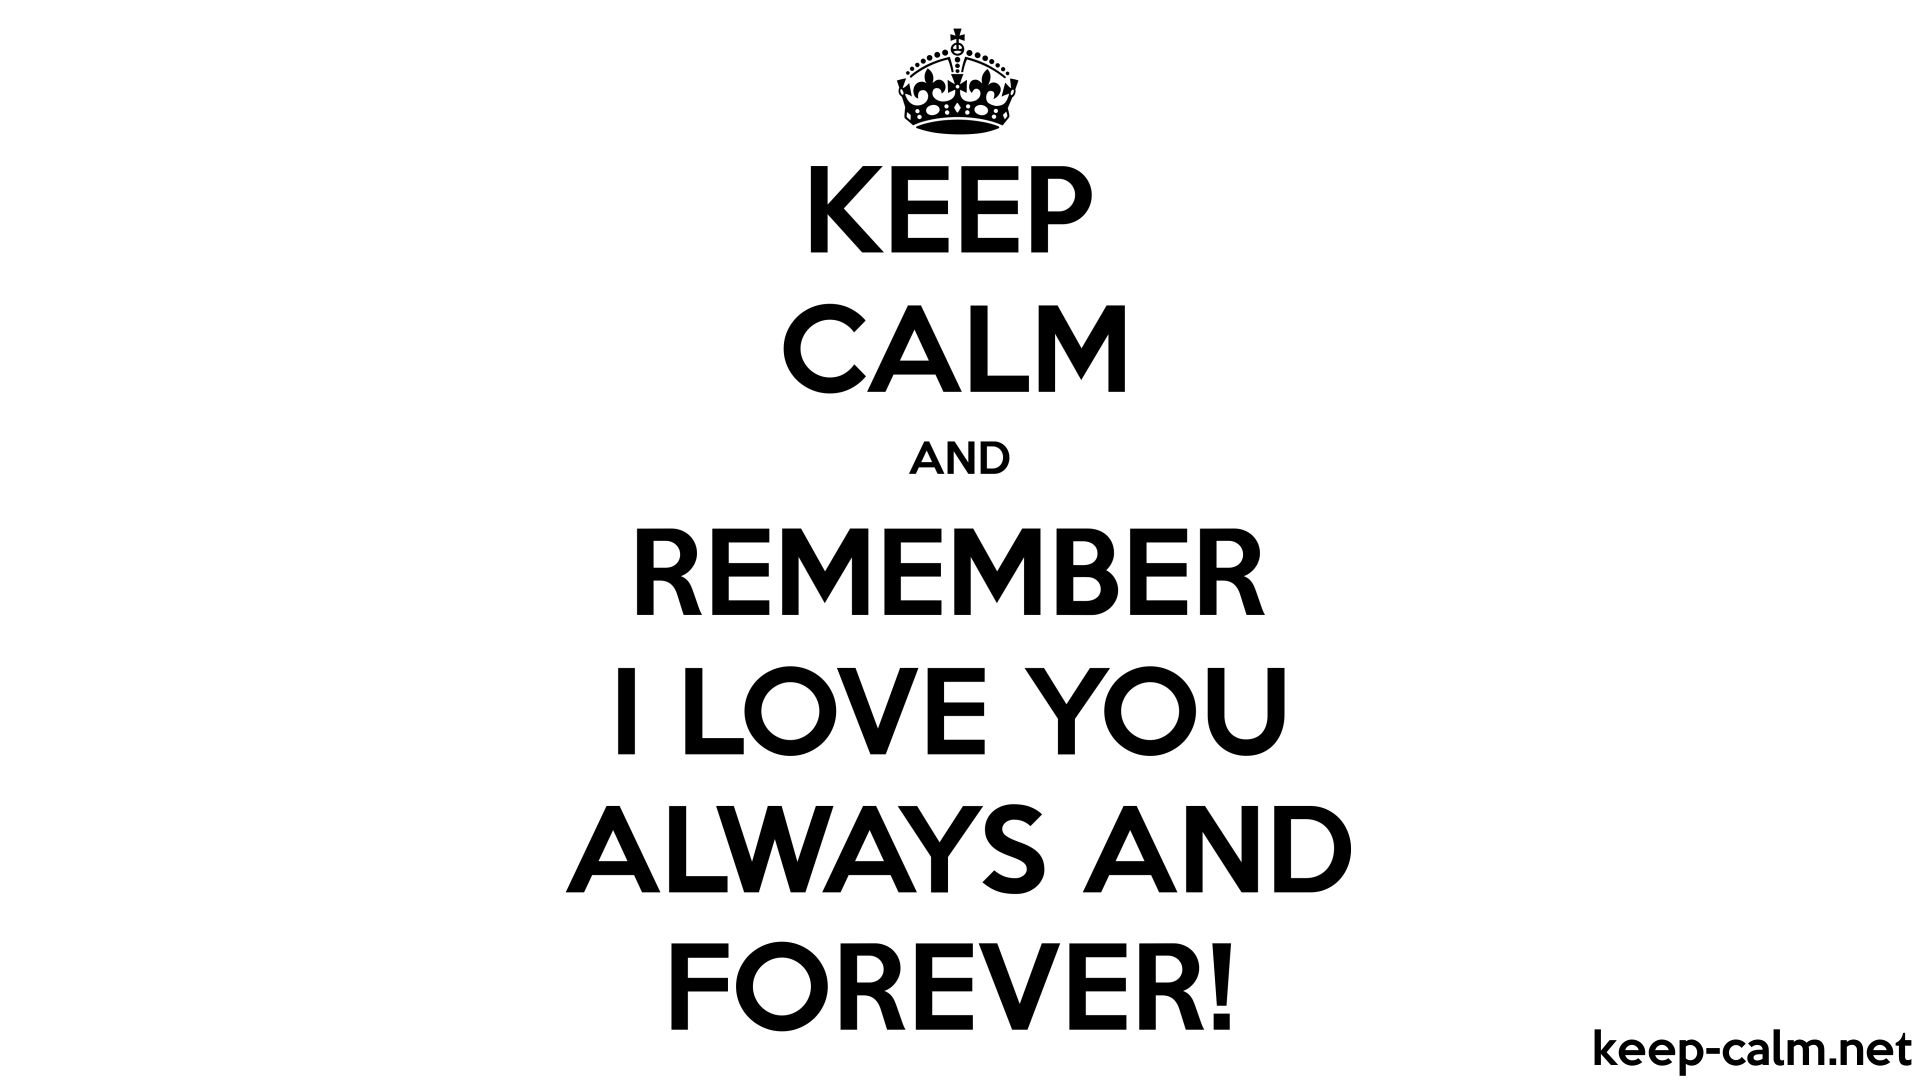 KEEP CALM AND REMEMBER I LOVE YOU ALWAYS AND FOREVER!